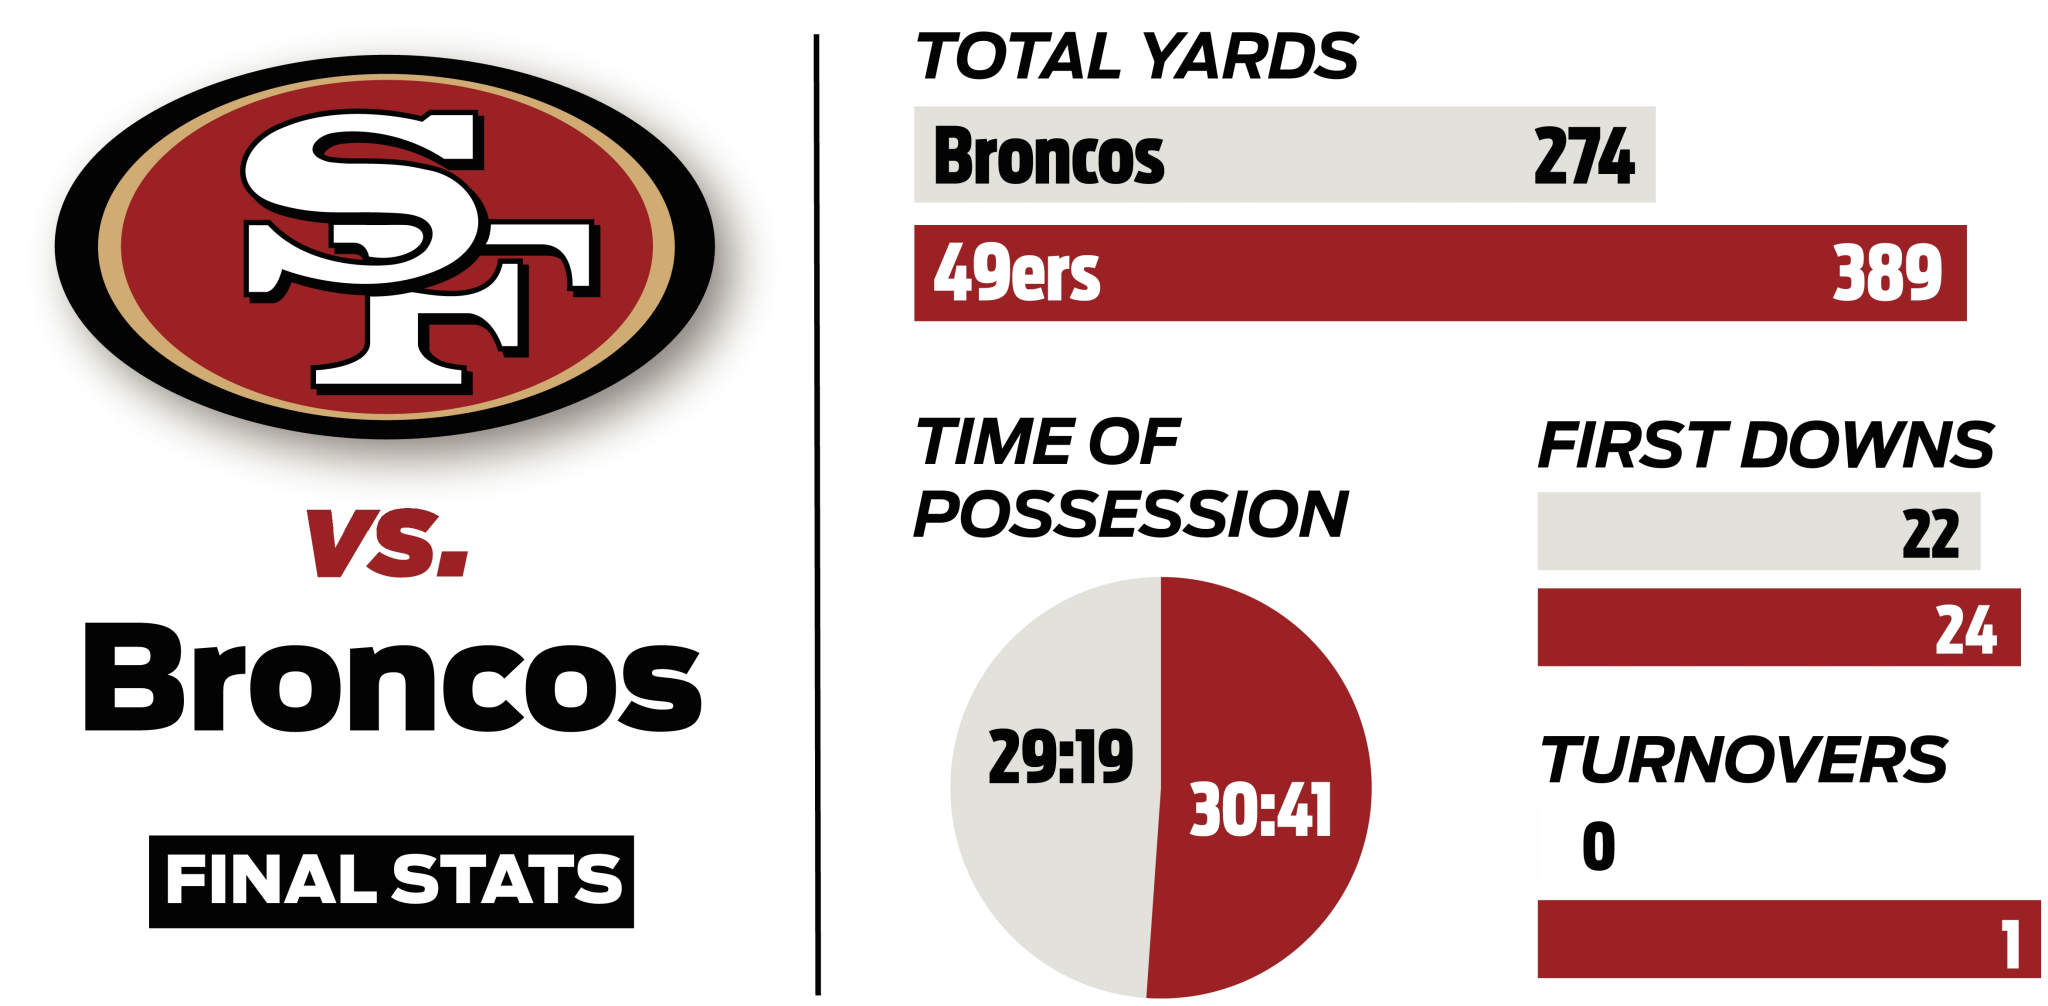 49ers’ stats and facts, vs. Denver